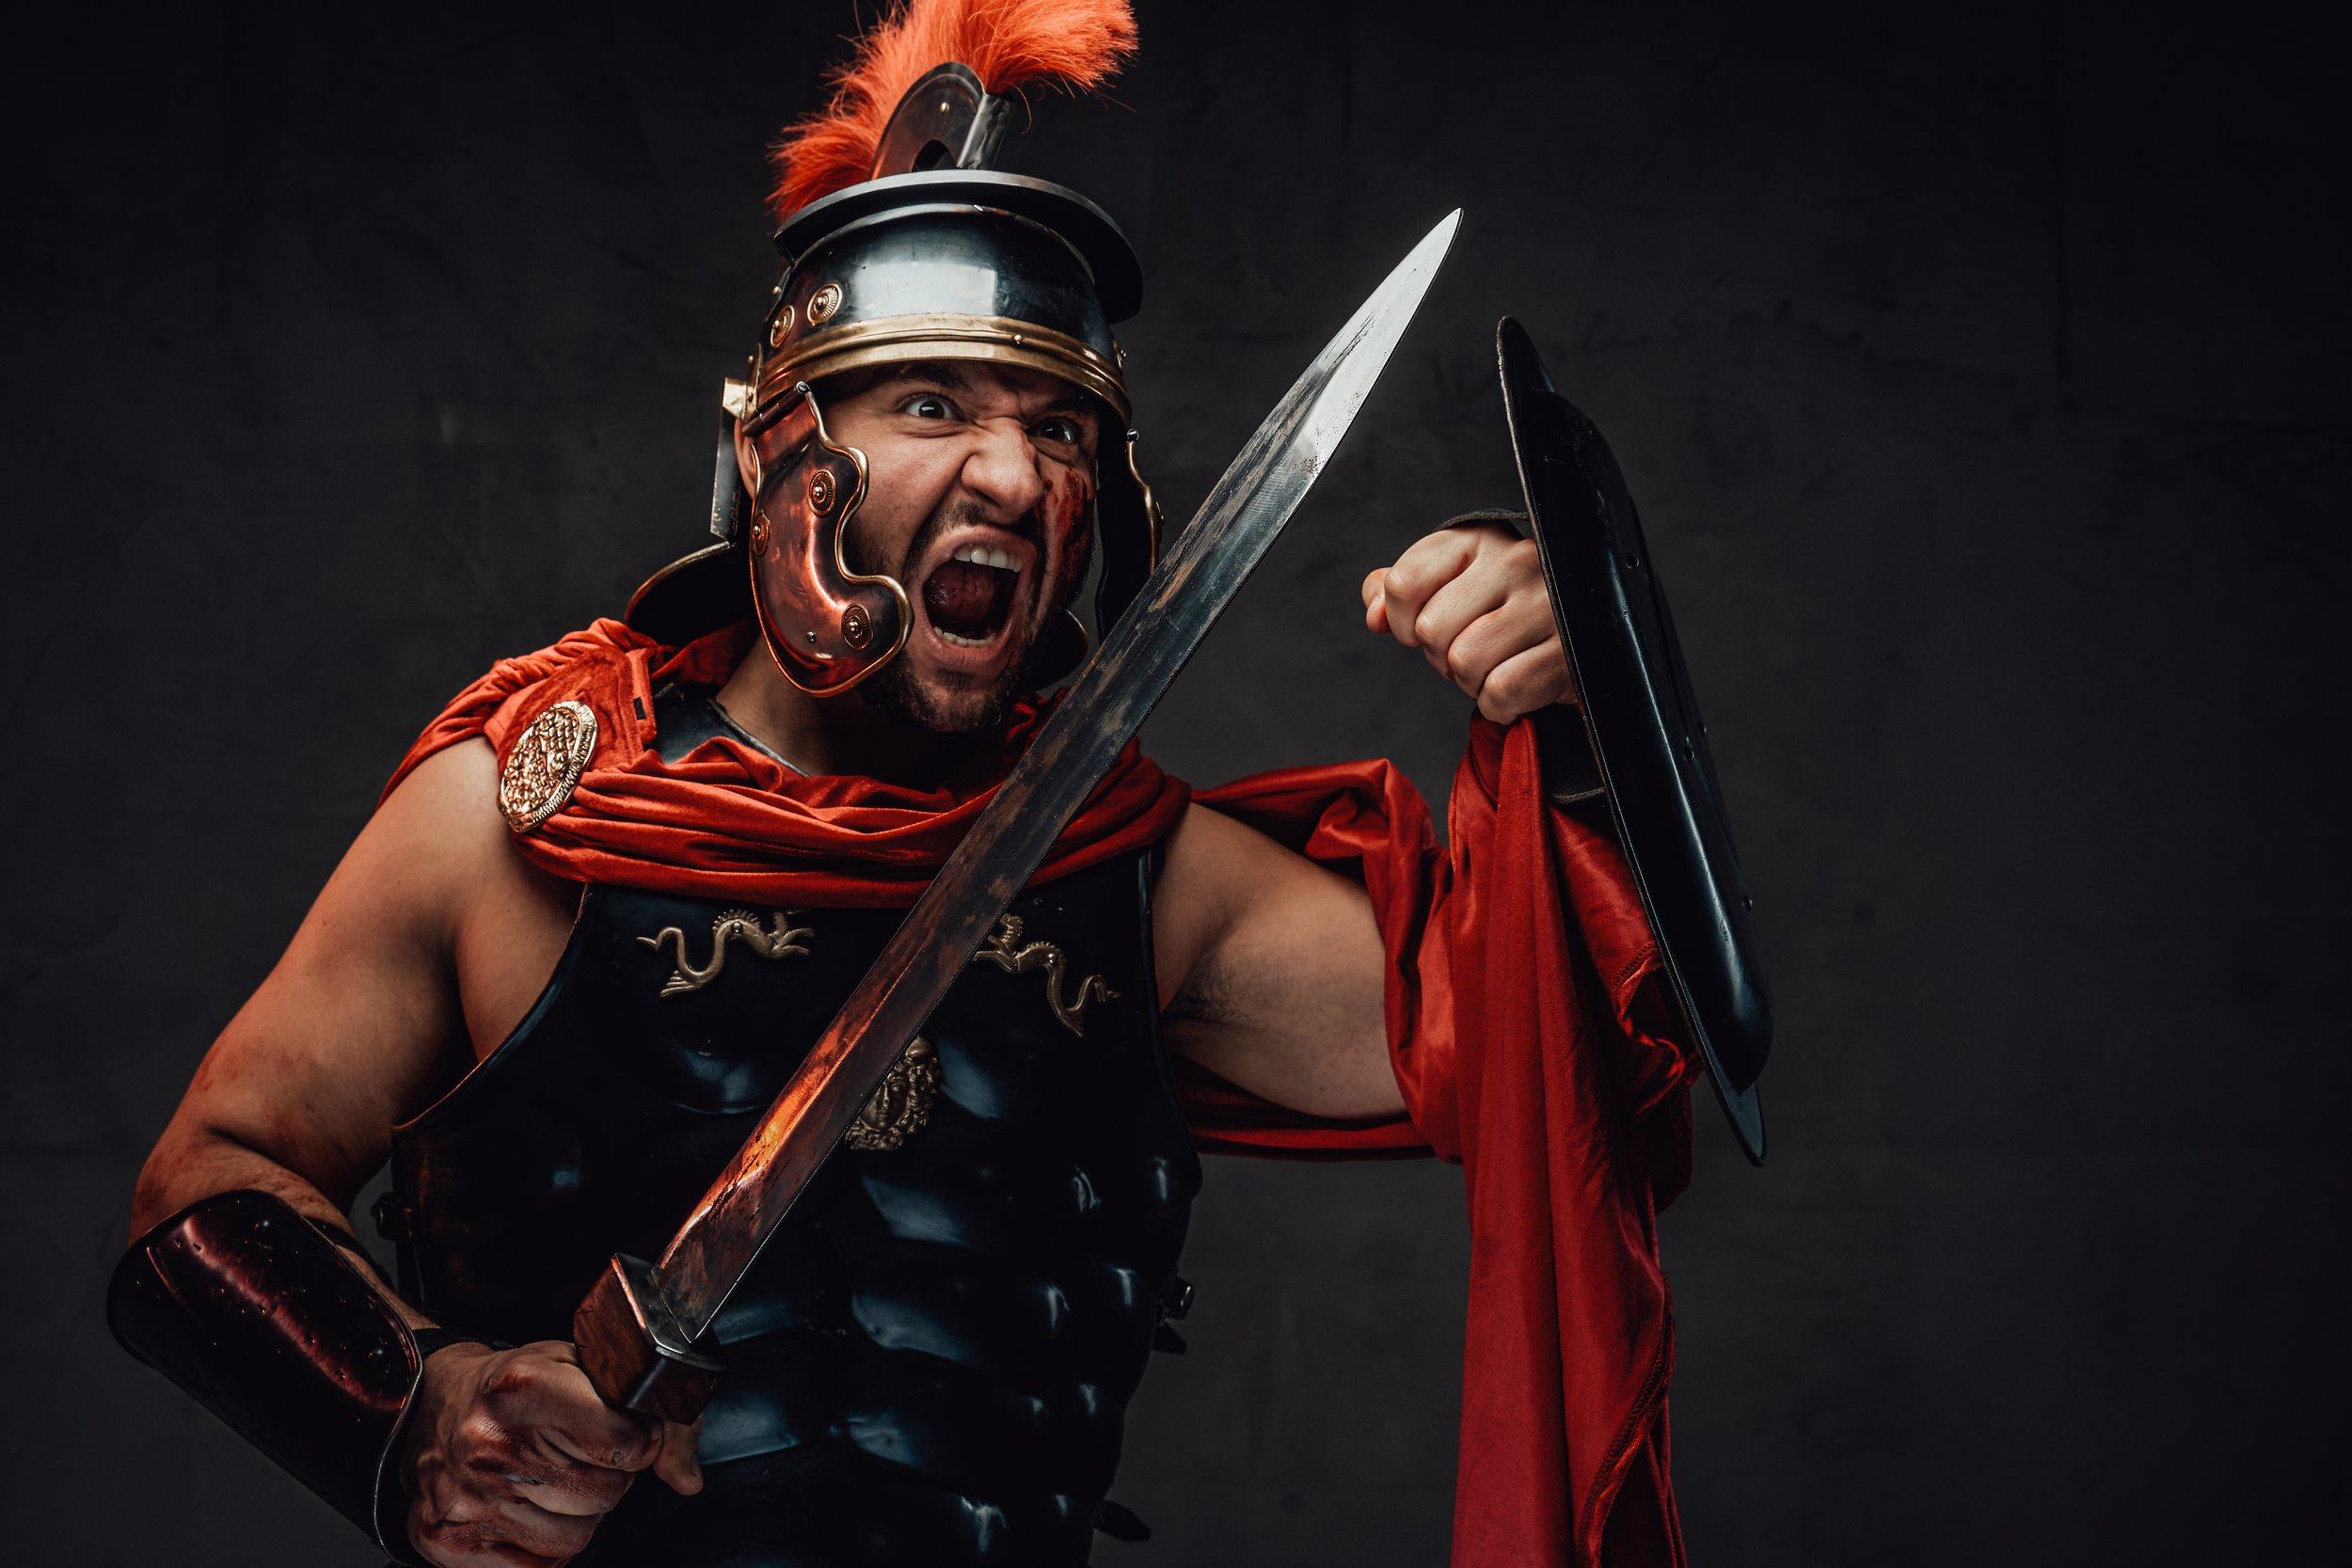 10 Deadly Weapons Of The Roman Army You Won't Believe Existed!